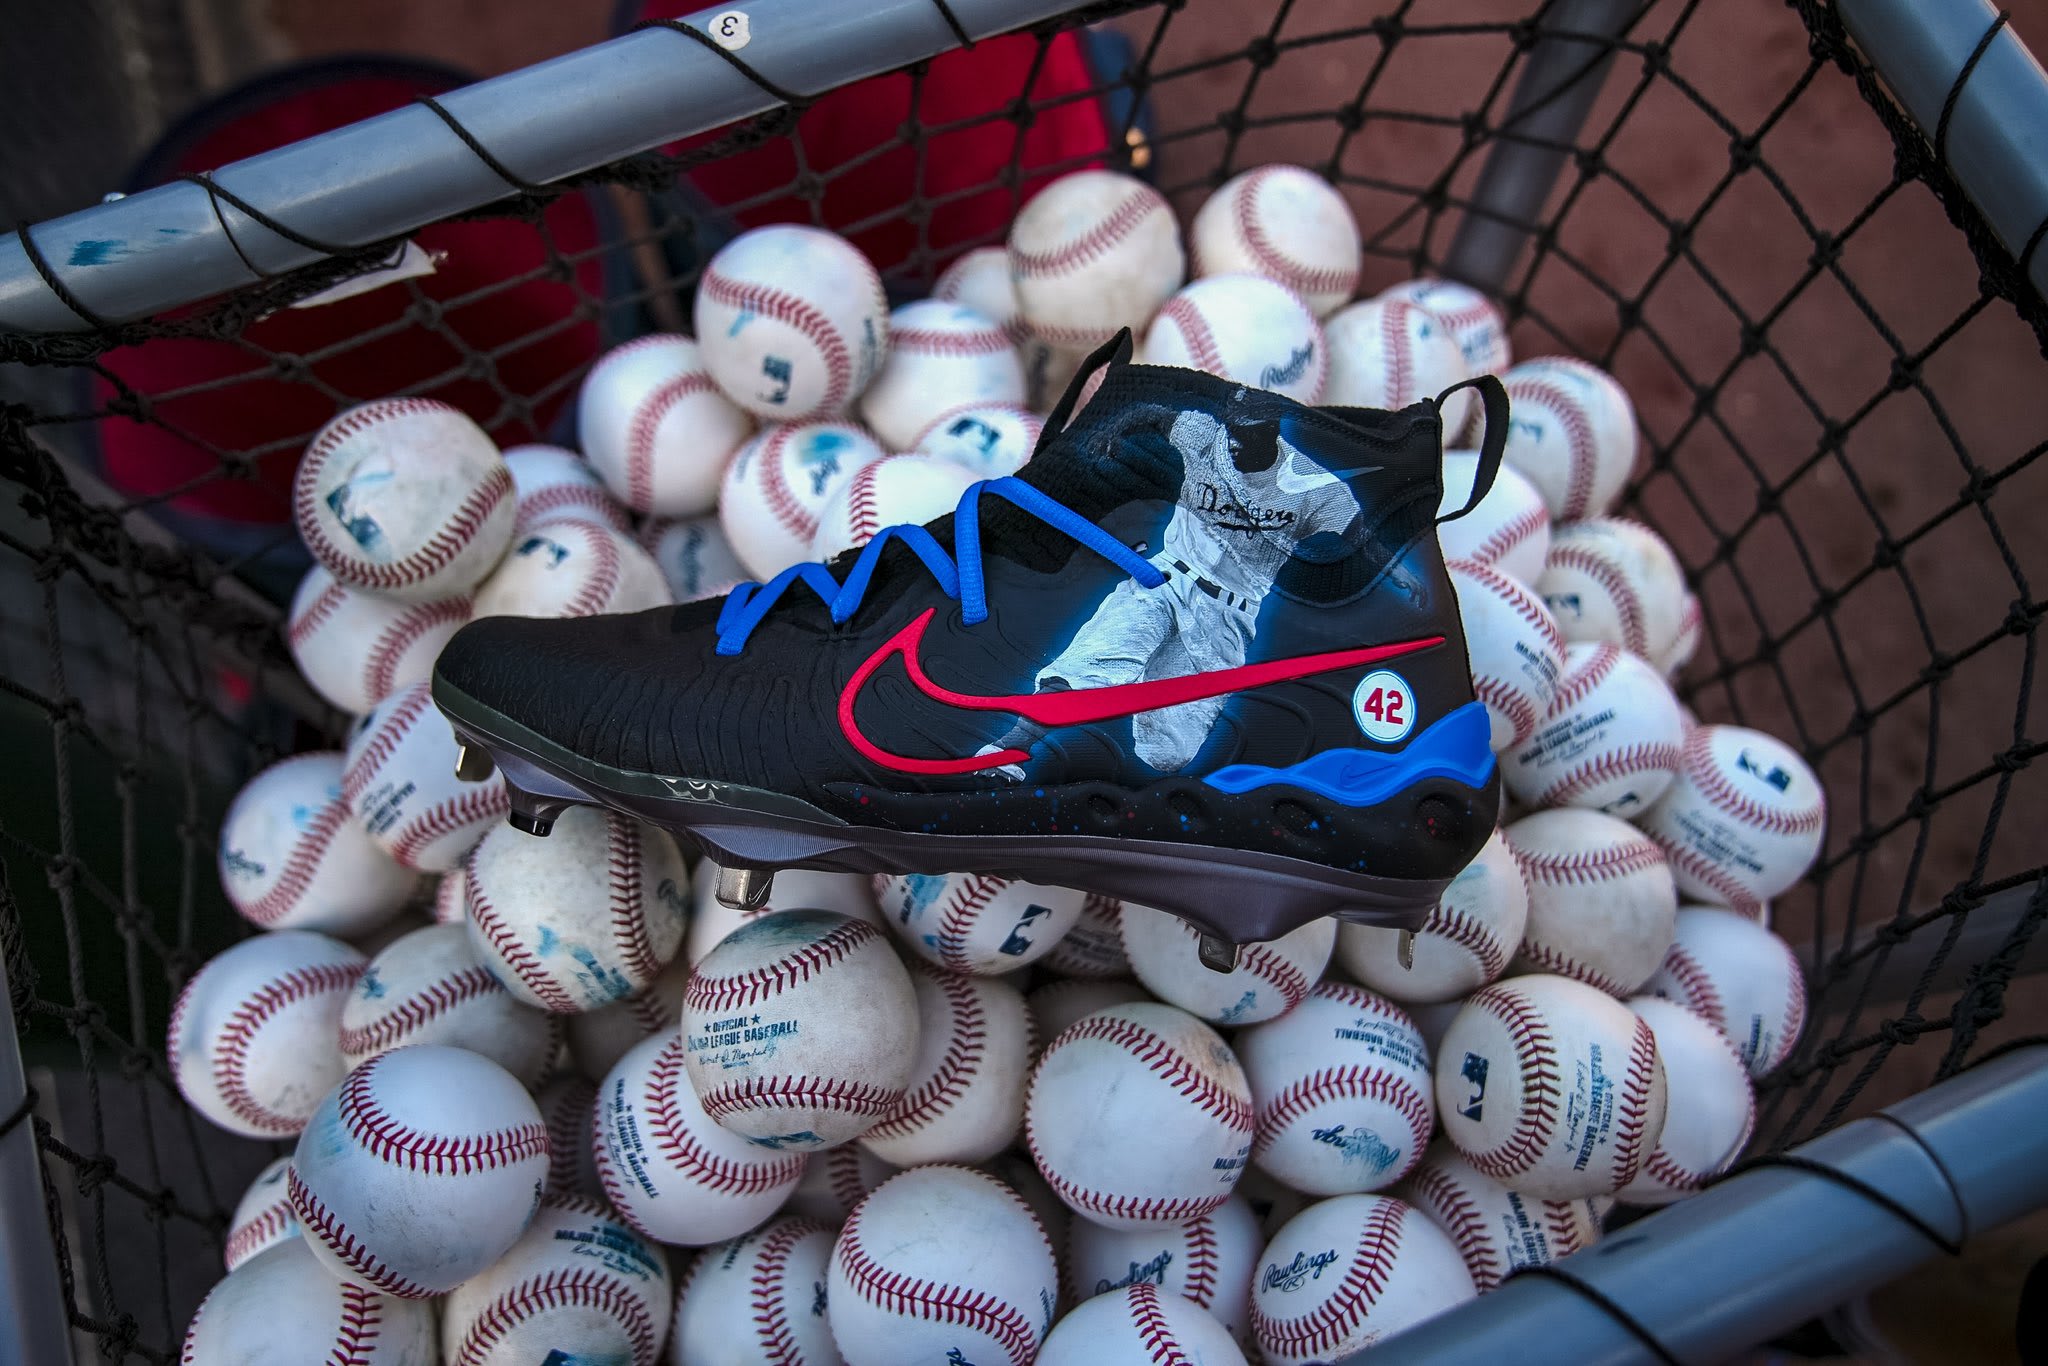 Byron Buxton's custom cleats featuring a photo of Jackie Robinson